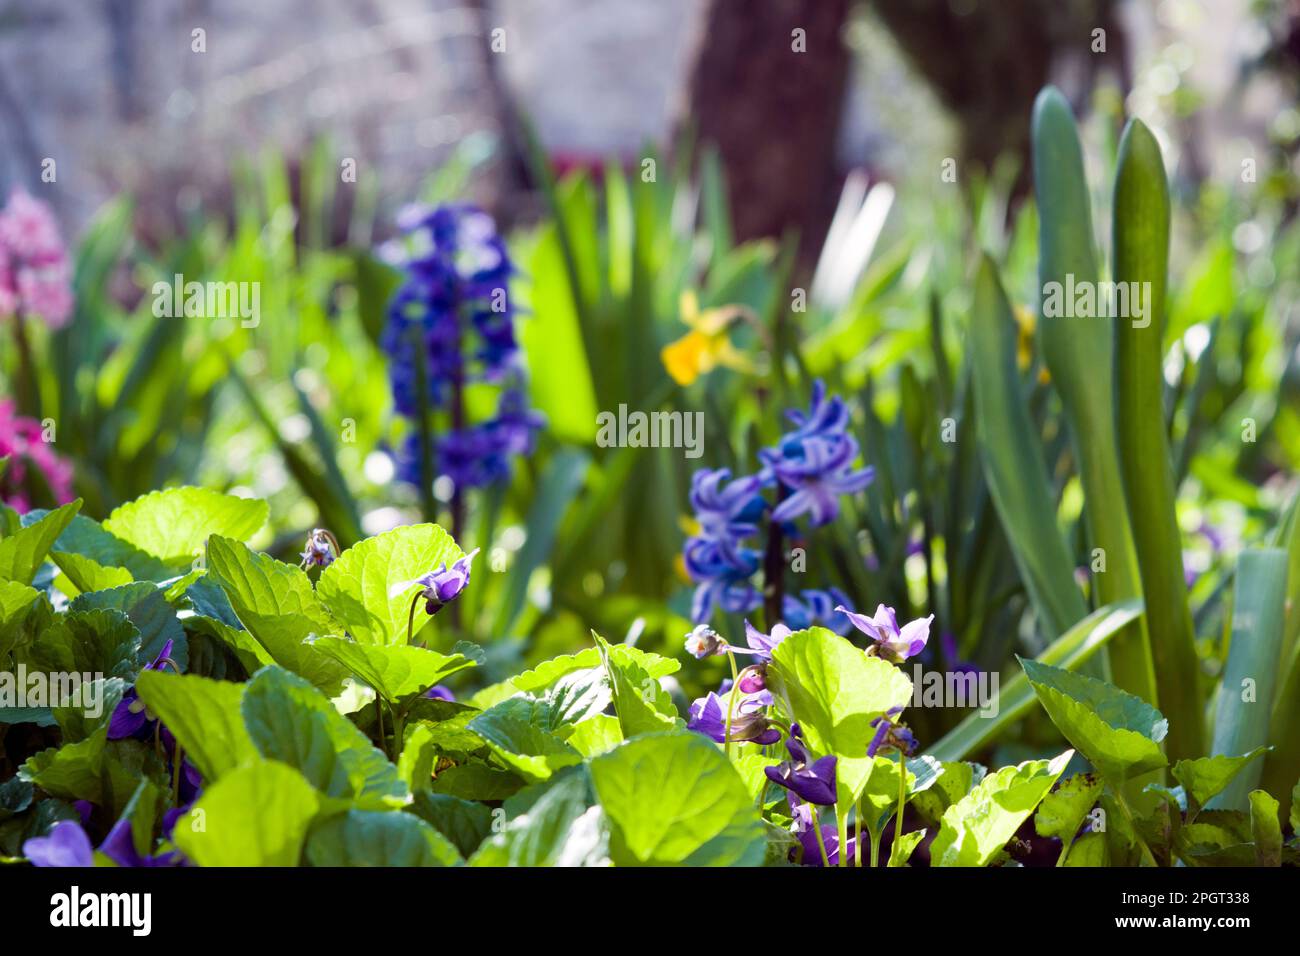 Close-up nature frame with fresh spring flowers in the garden: bluebells, hyacinths, daffodils, green leaves, the sun gently shining on them. Stock Photo